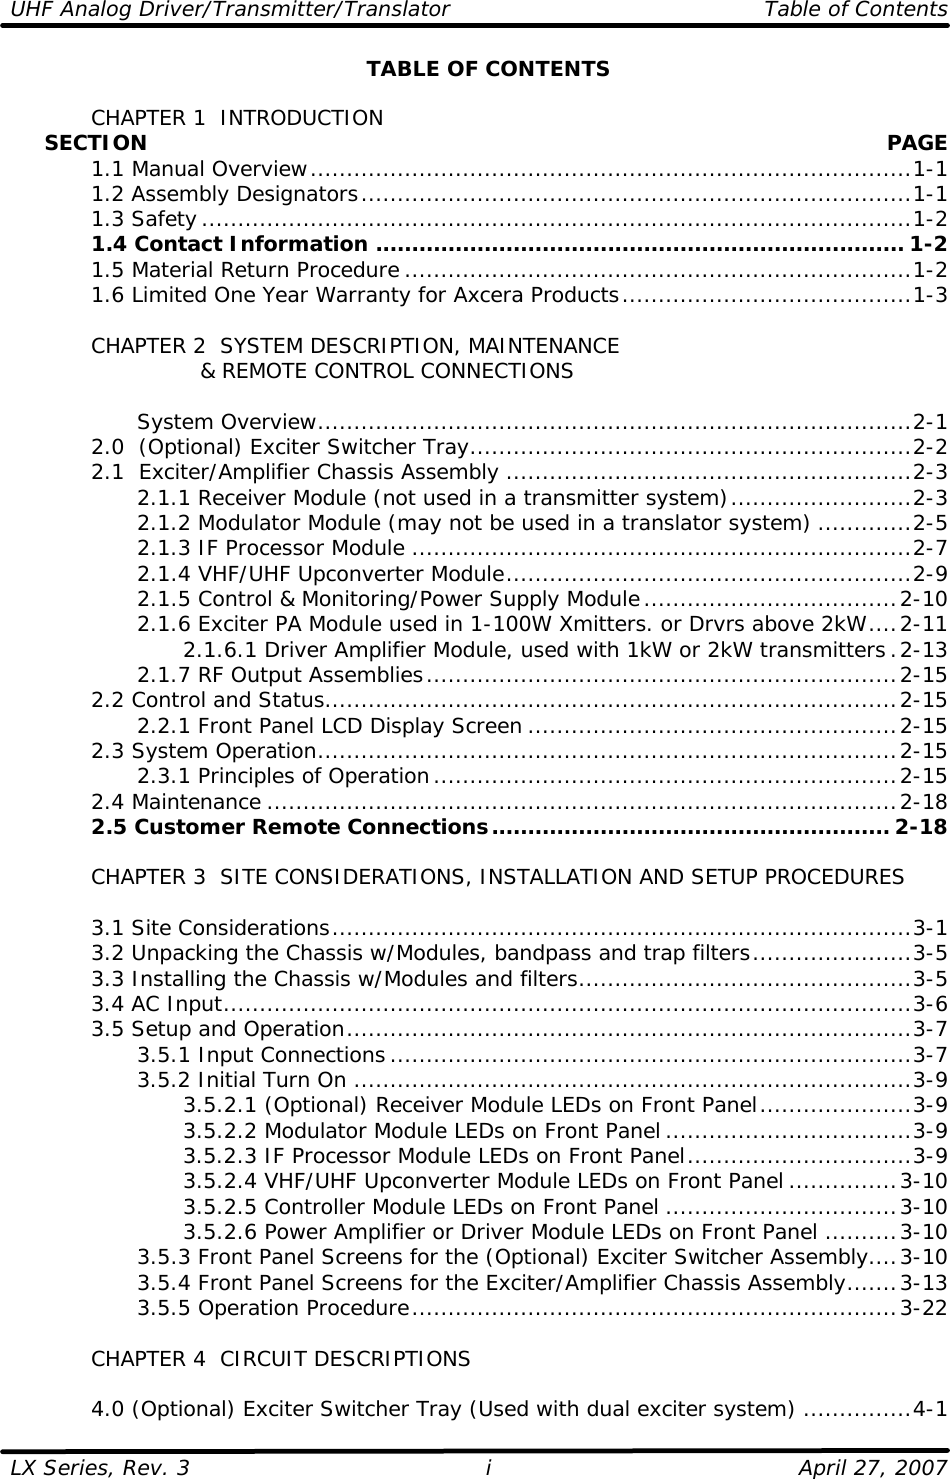 UHF Analog Driver/Transmitter/Translator   Table of Contents  LX Series, Rev. 3    April 27, 2007 iTABLE OF CONTENTS   CHAPTER 1  INTRODUCTION      SECTION    PAGE  1.1 Manual Overview...................................................................................1-1  1.2 Assembly Designators............................................................................1-1  1.3 Safety..................................................................................................1-2  1.4 Contact Information ......................................................................... 1-2  1.5 Material Return Procedure ......................................................................1-2  1.6 Limited One Year Warranty for Axcera Products........................................1-3   CHAPTER 2  SYSTEM DESCRIPTION, MAINTENANCE              &amp; REMOTE CONTROL CONNECTIONS      System Overview..................................................................................2-1  2.0  (Optional) Exciter Switcher Tray.............................................................2-2  2.1  Exciter/Amplifier Chassis Assembly ........................................................2-3     2.1.1 Receiver Module (not used in a transmitter system).........................2-3     2.1.2 Modulator Module (may not be used in a translator system) .............2-5     2.1.3 IF Processor Module .....................................................................2-7     2.1.4 VHF/UHF Upconverter Module........................................................2-9     2.1.5 Control &amp; Monitoring/Power Supply Module...................................2-10     2.1.6 Exciter PA Module used in 1-100W Xmitters. or Drvrs above 2kW....2-11     2.1.6.1 Driver Amplifier Module, used with 1kW or 2kW transmitters.2-13     2.1.7 RF Output Assemblies.................................................................2-15  2.2 Control and Status...............................................................................2-15     2.2.1 Front Panel LCD Display Screen ...................................................2-15  2.3 System Operation................................................................................2-15     2.3.1 Principles of Operation................................................................2-15  2.4 Maintenance .......................................................................................2-18  2.5 Customer Remote Connections....................................................... 2-18   CHAPTER 3  SITE CONSIDERATIONS, INSTALLATION AND SETUP PROCEDURES     3.1 Site Considerations................................................................................3-1  3.2 Unpacking the Chassis w/Modules, bandpass and trap filters......................3-5  3.3 Installing the Chassis w/Modules and filters..............................................3-5  3.4 AC Input...............................................................................................3-6  3.5 Setup and Operation..............................................................................3-7     3.5.1 Input Connections........................................................................3-7     3.5.2 Initial Turn On .............................................................................3-9     3.5.2.1 (Optional) Receiver Module LEDs on Front Panel.....................3-9     3.5.2.2 Modulator Module LEDs on Front Panel ..................................3-9     3.5.2.3 IF Processor Module LEDs on Front Panel...............................3-9     3.5.2.4 VHF/UHF Upconverter Module LEDs on Front Panel ...............3-10     3.5.2.5 Controller Module LEDs on Front Panel ................................3-10     3.5.2.6 Power Amplifier or Driver Module LEDs on Front Panel ..........3-10     3.5.3 Front Panel Screens for the (Optional) Exciter Switcher Assembly....3-10     3.5.4 Front Panel Screens for the Exciter/Amplifier Chassis Assembly.......3-13     3.5.5 Operation Procedure...................................................................3-22   CHAPTER 4  CIRCUIT DESCRIPTIONS   4.0 (Optional) Exciter Switcher Tray (Used with dual exciter system) ...............4-1 